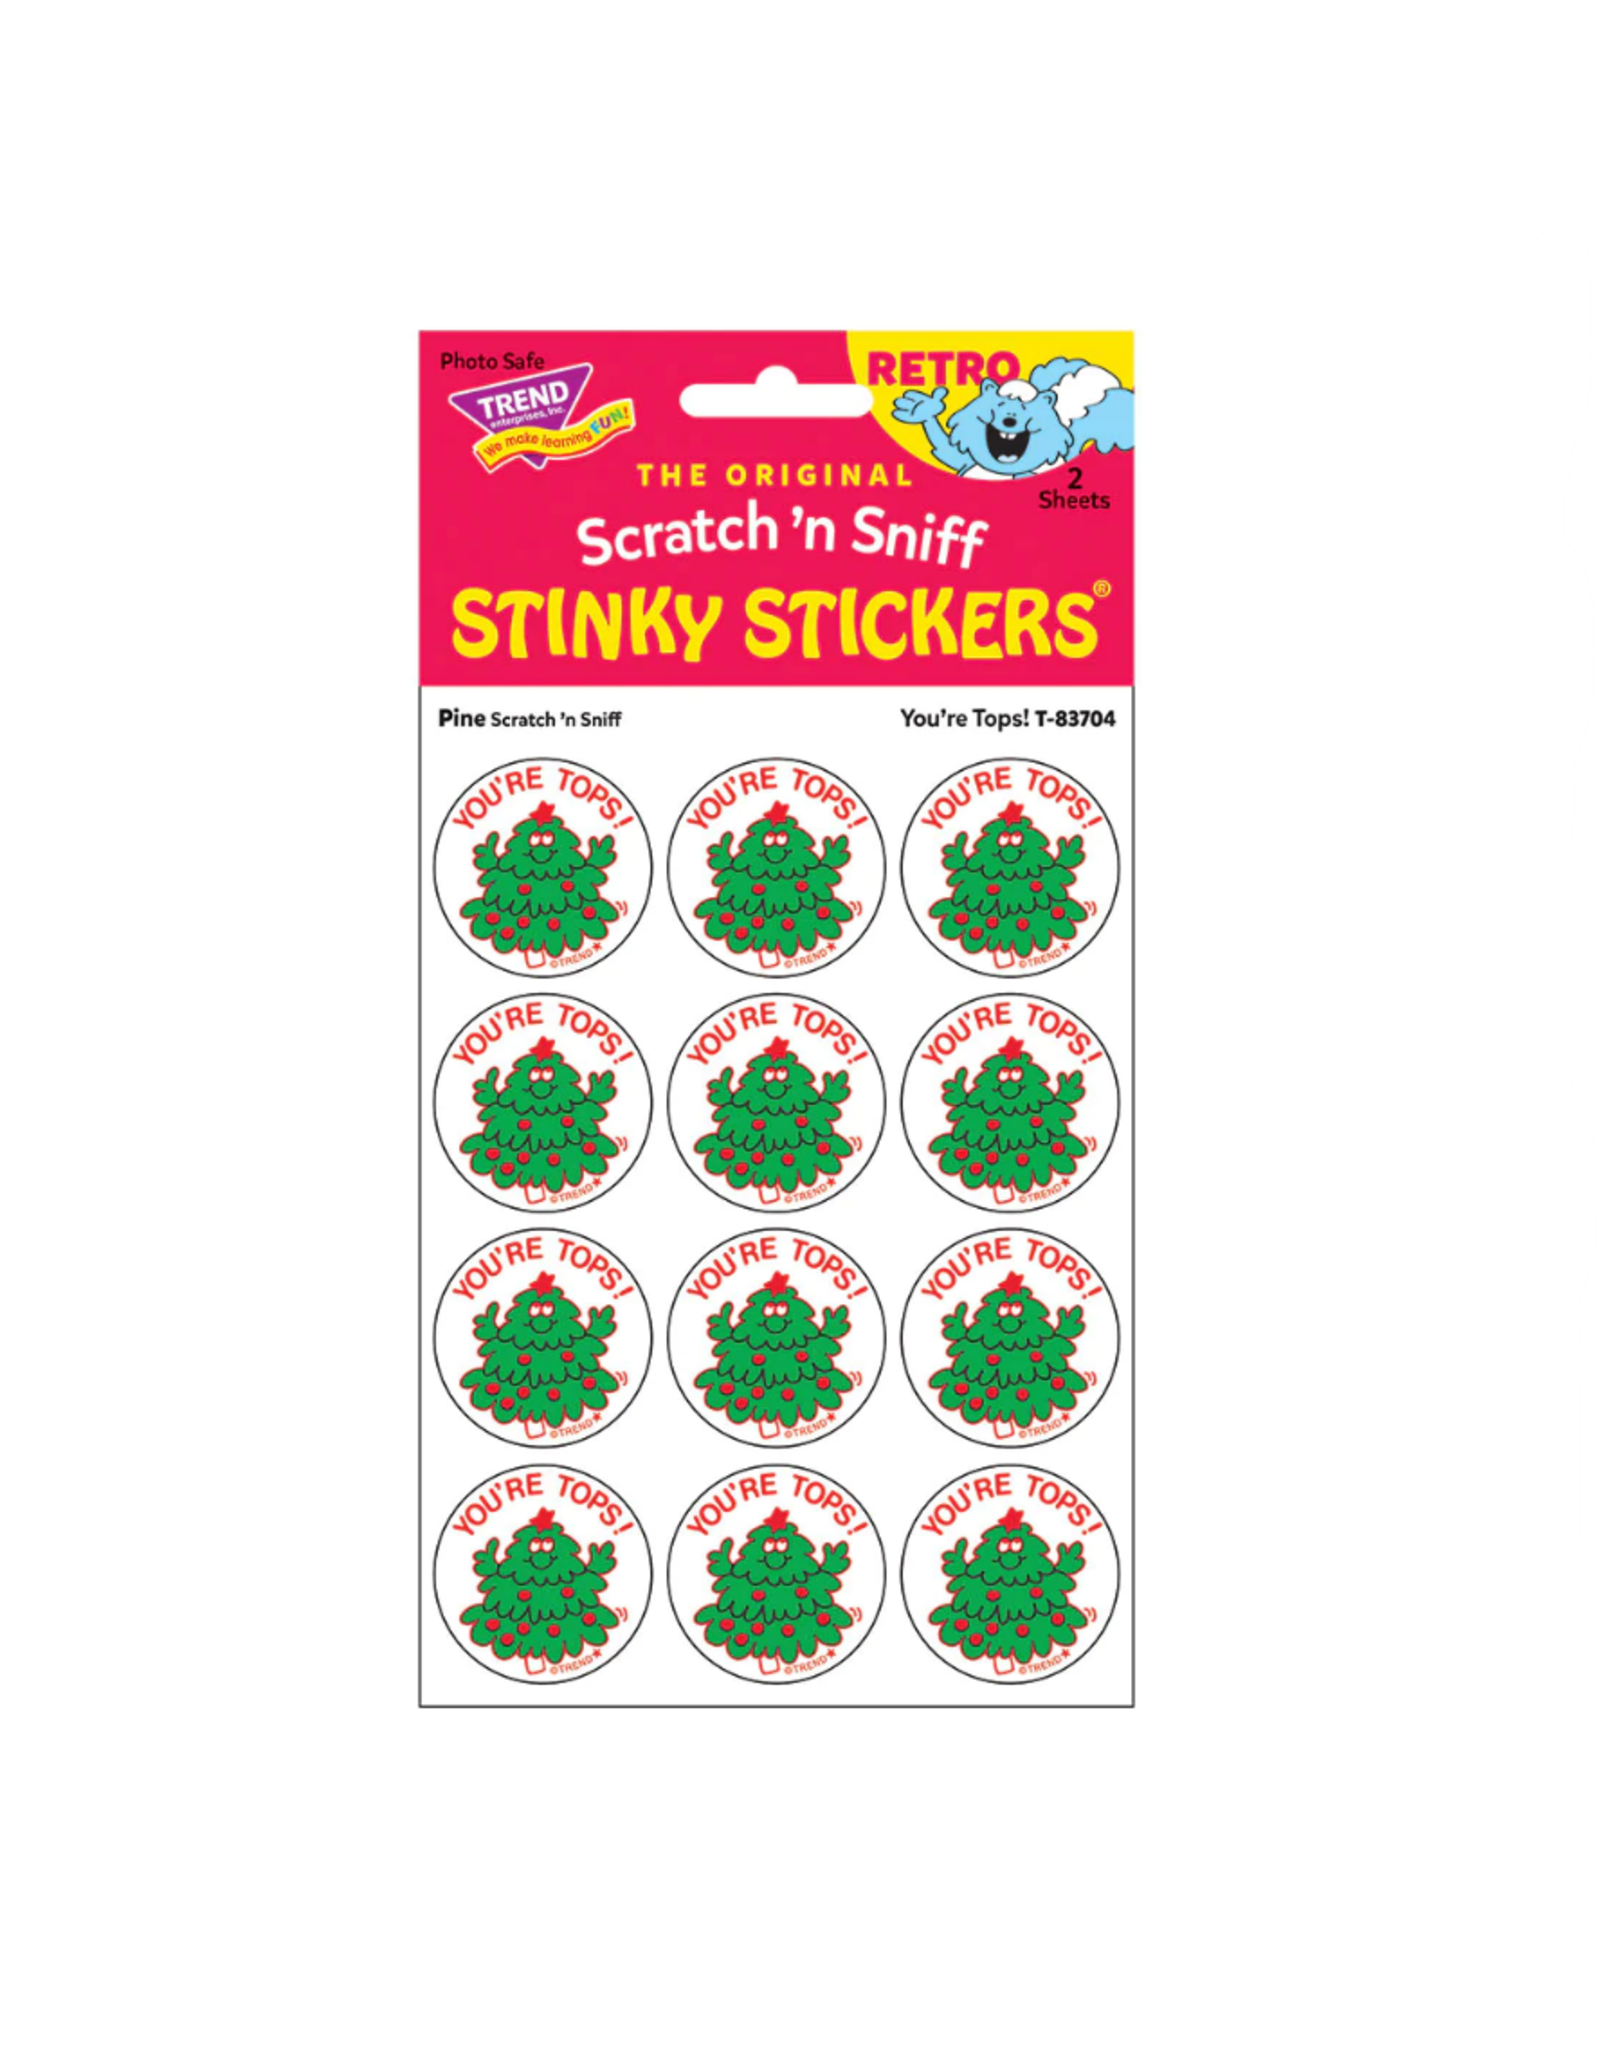 Stinky Stickers: You're Tops!